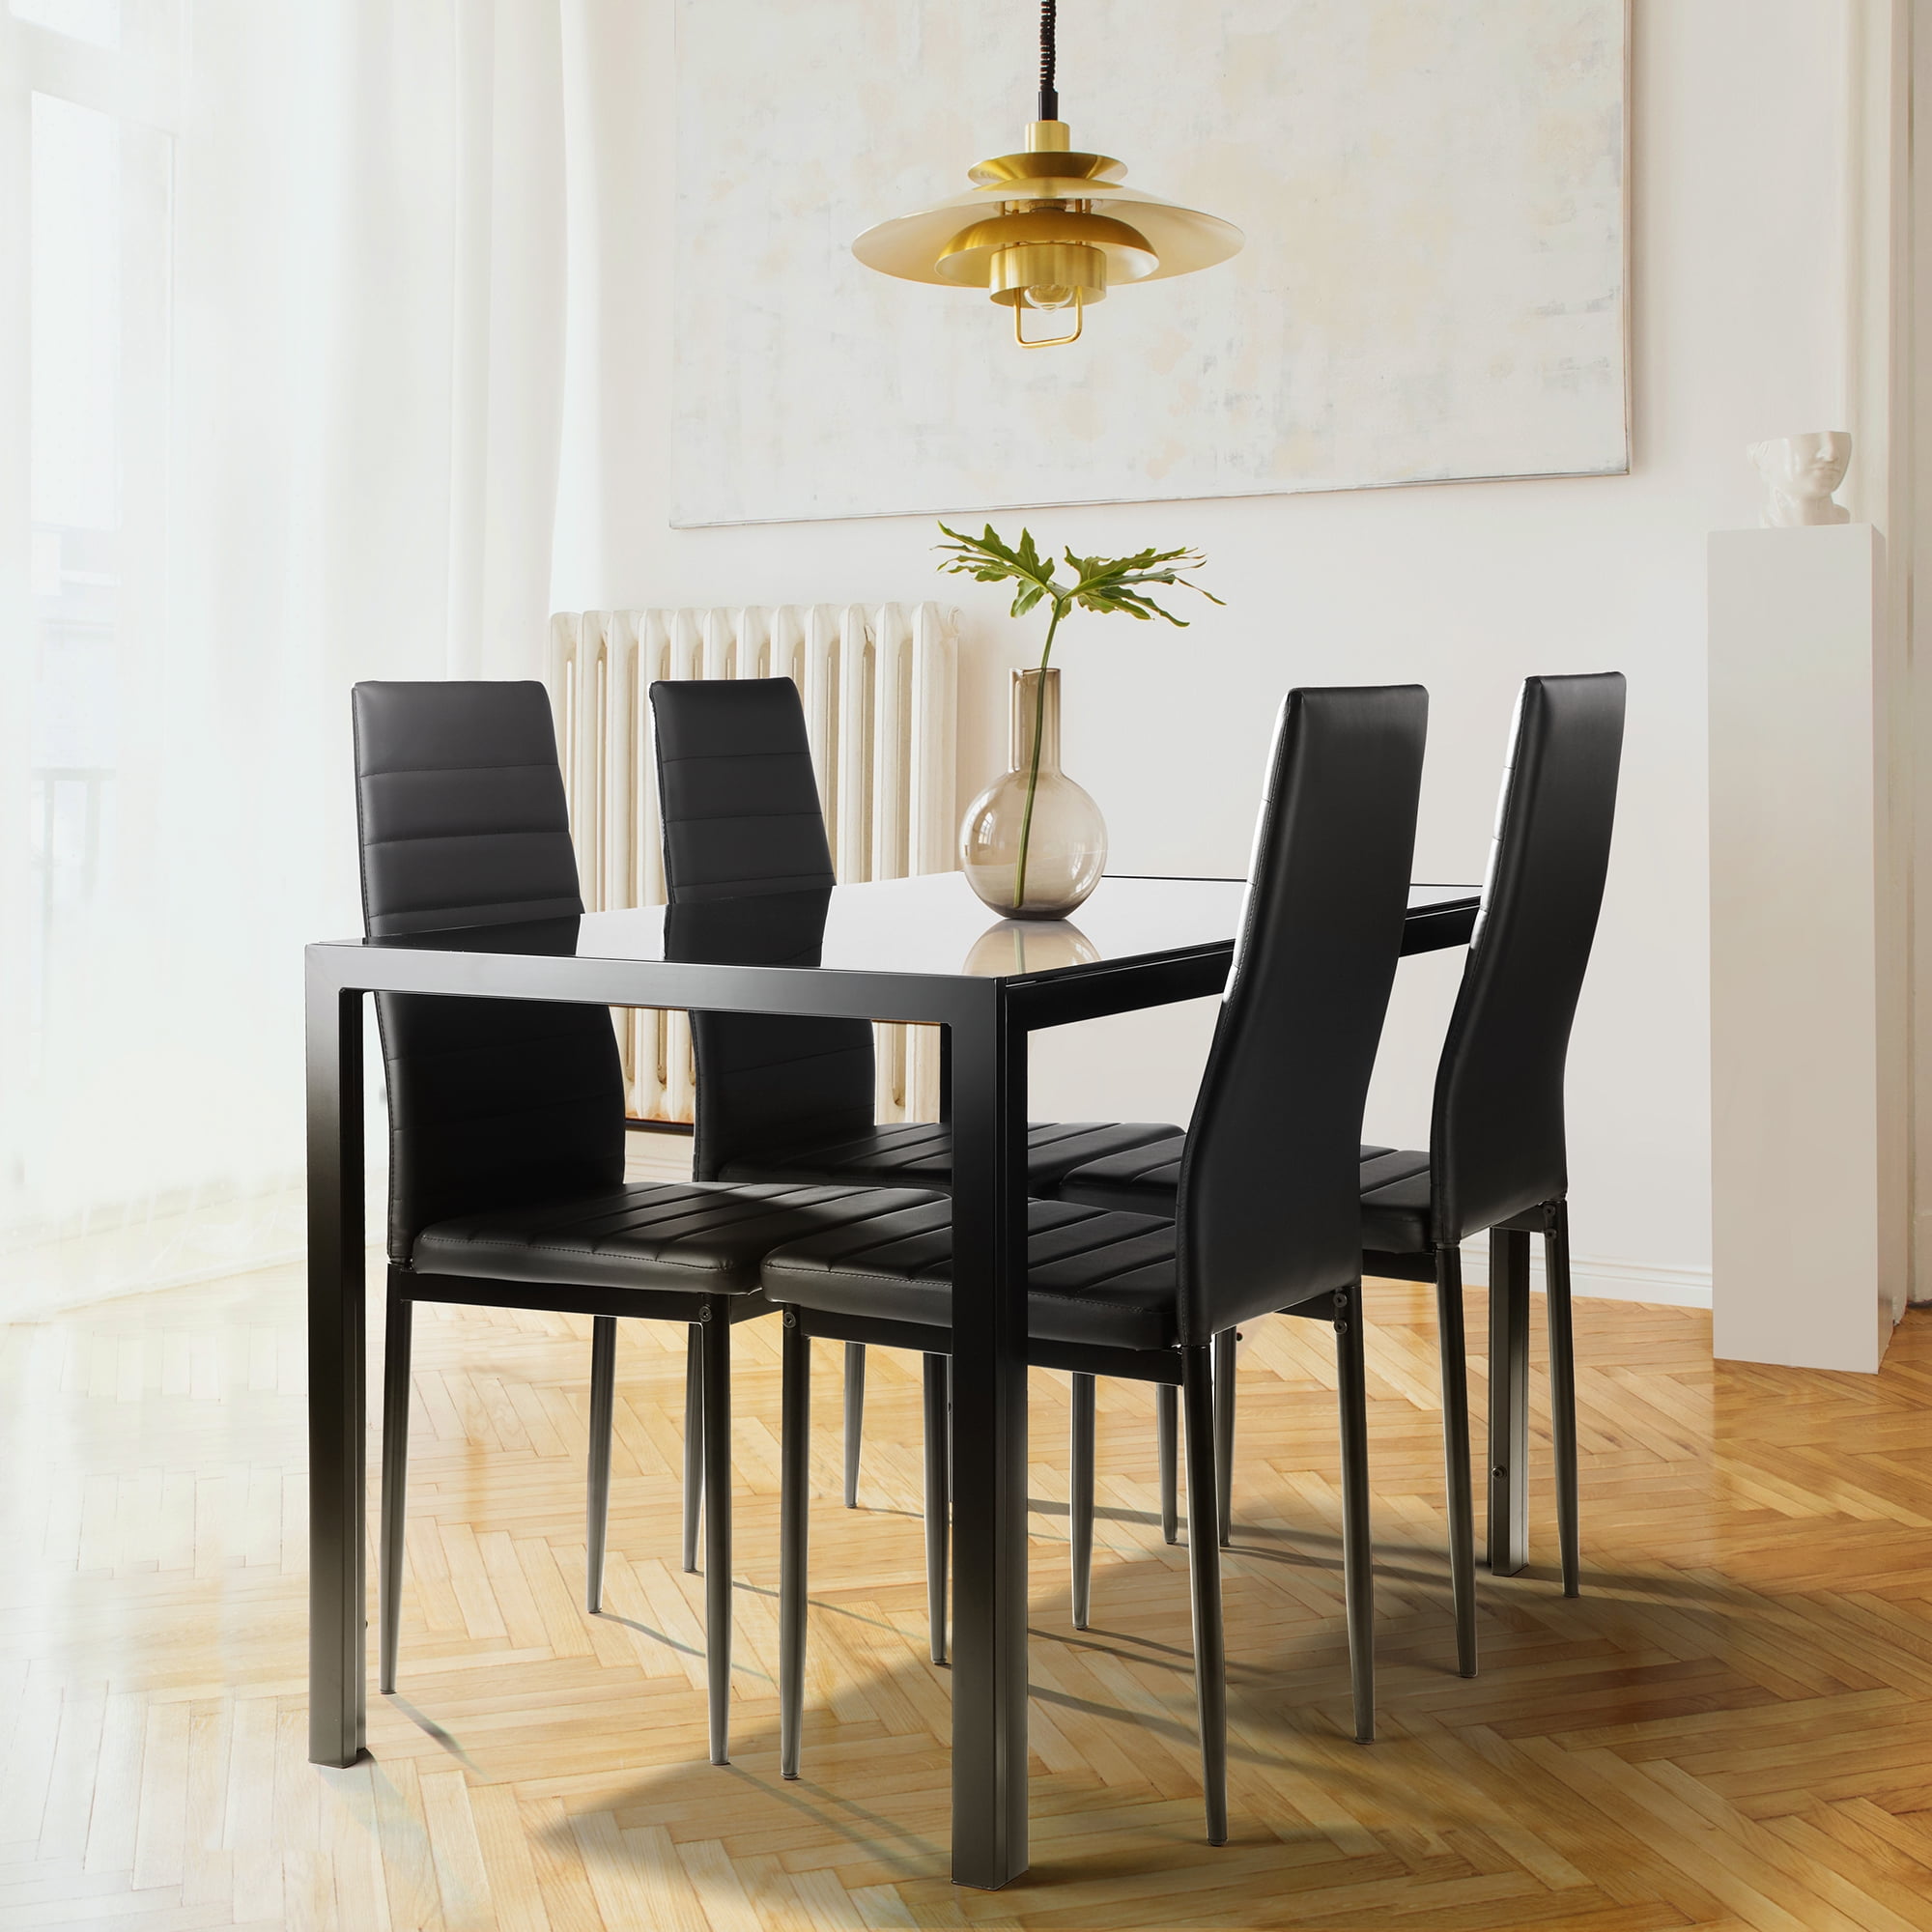 Dining Furniture Set 4x Black Faux Leather Dining Chairs Table Tempered Glass 